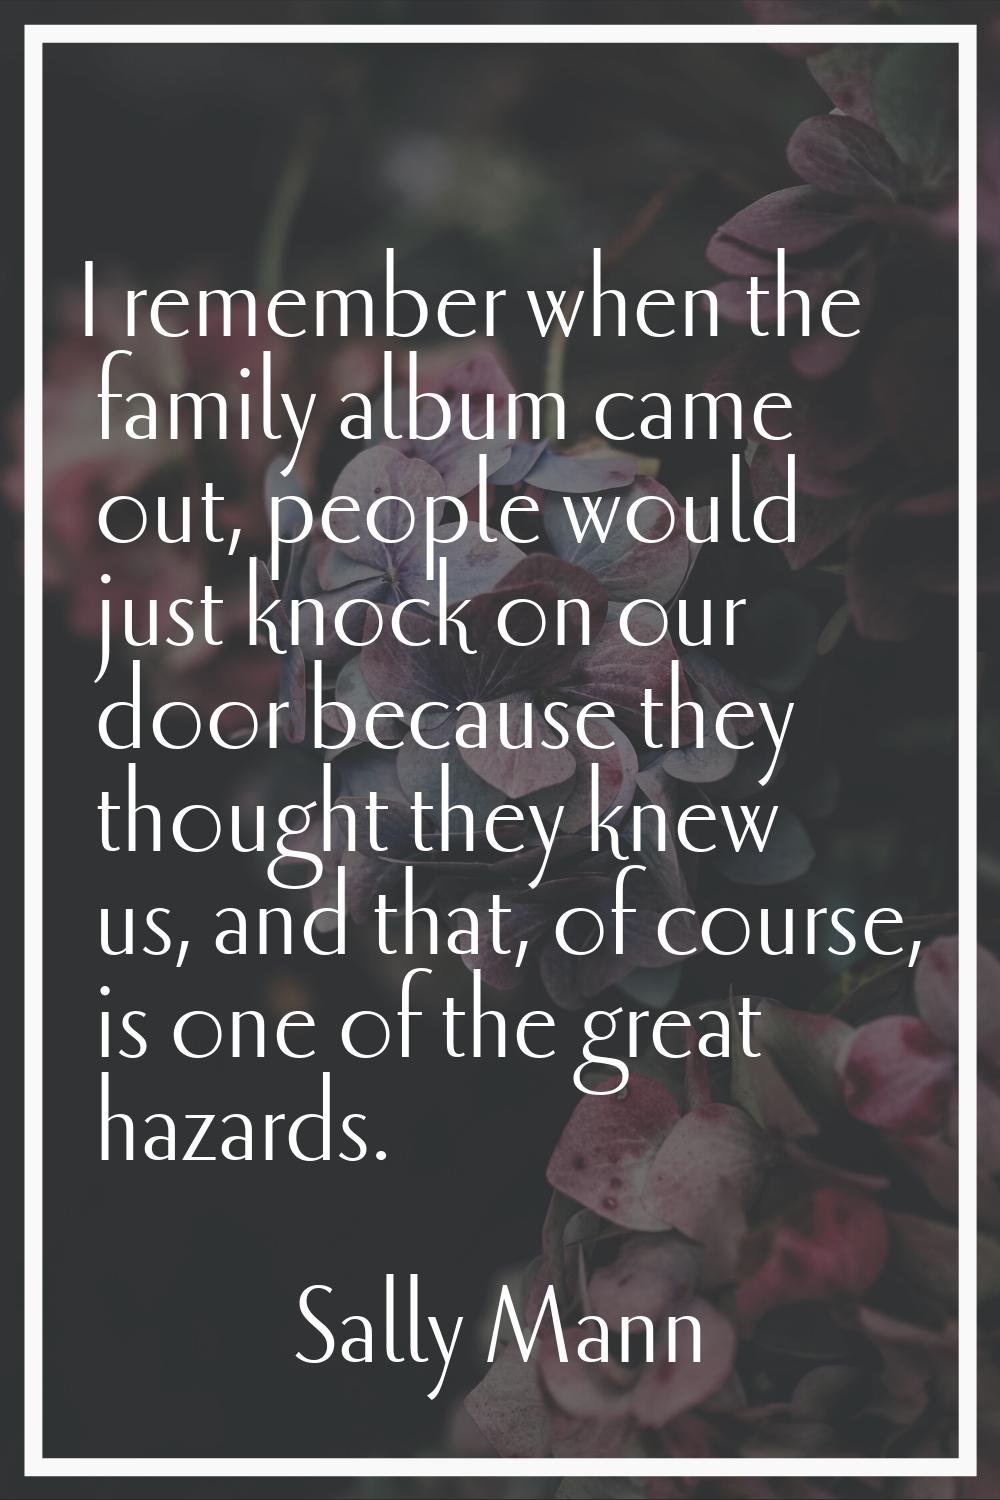 I remember when the family album came out, people would just knock on our door because they thought